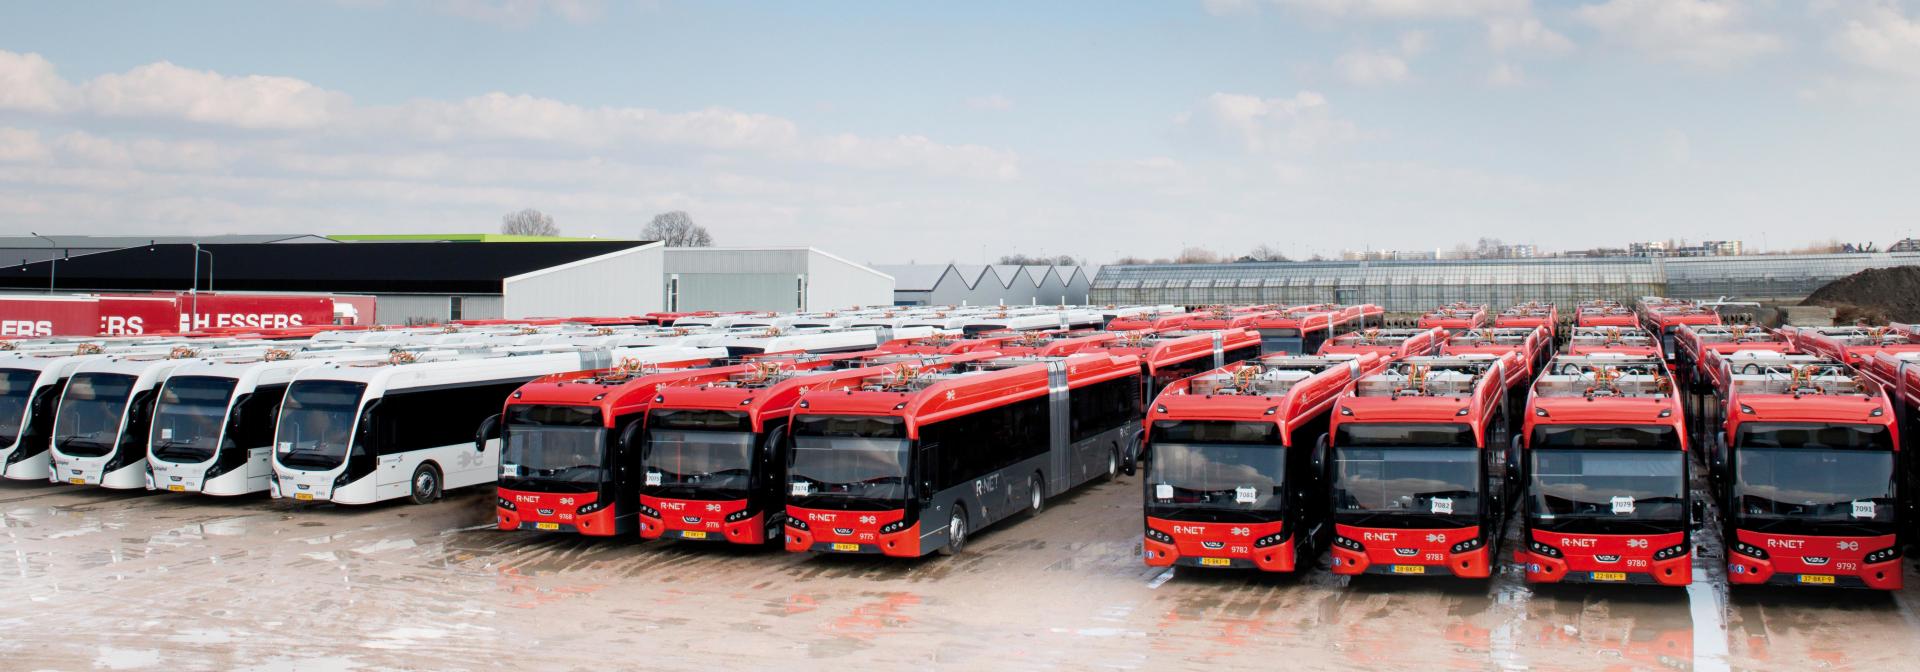 battery buses